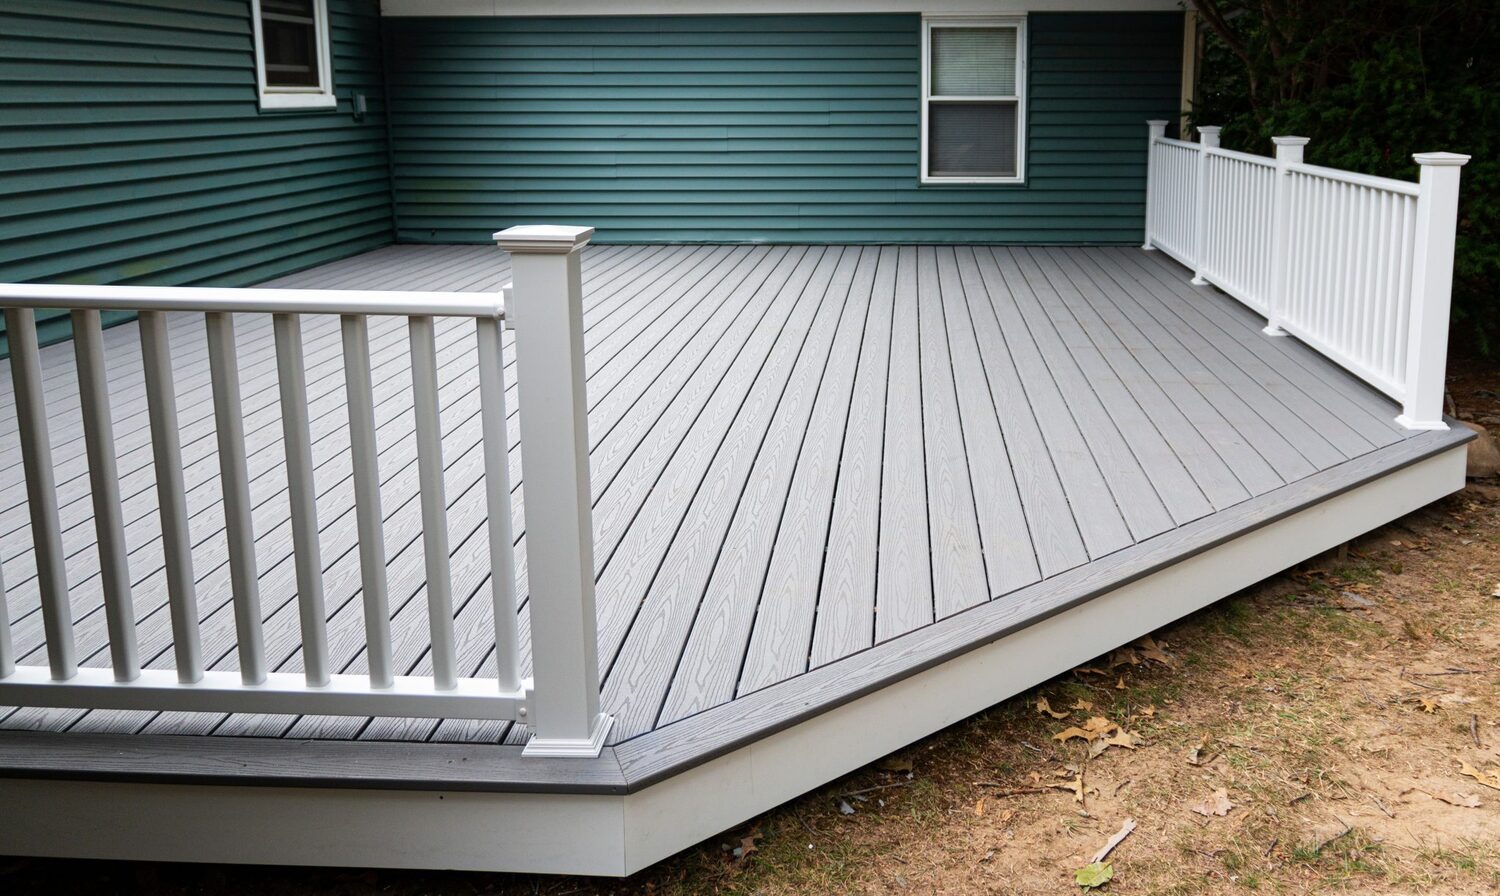 The stunning wooden deck in the backyard as a testament to the porch builders Skokie based team